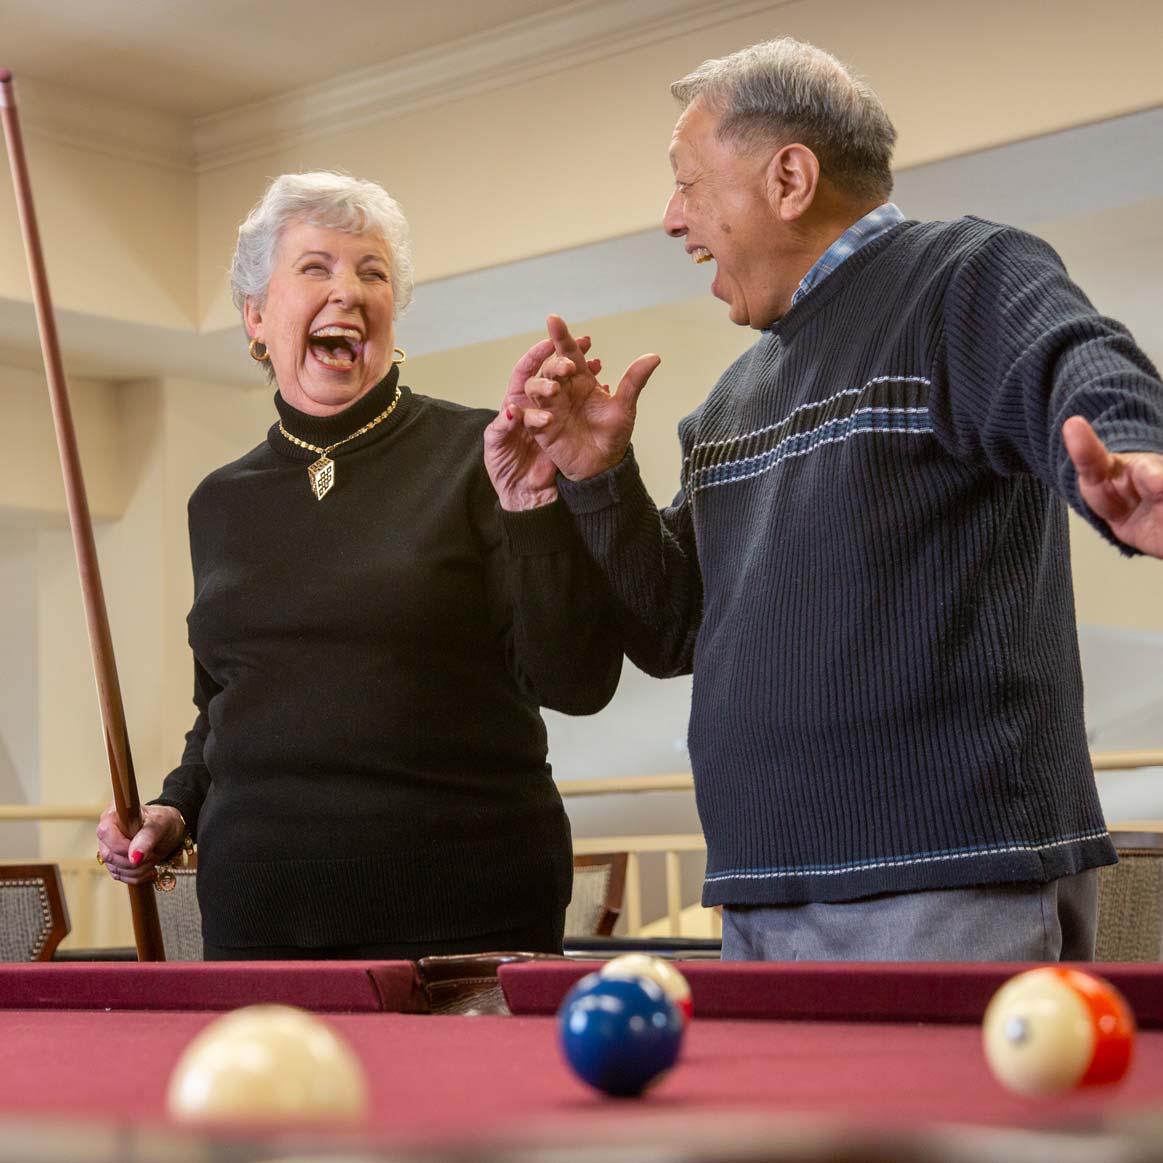 Two elderly individuals laugh and enjoy a game of pool. The woman, holding a cue stick, stands next to the man, who gestures animatedly. Several pool balls are visible on the table in the foreground. They both appear to be having a good time indoors.